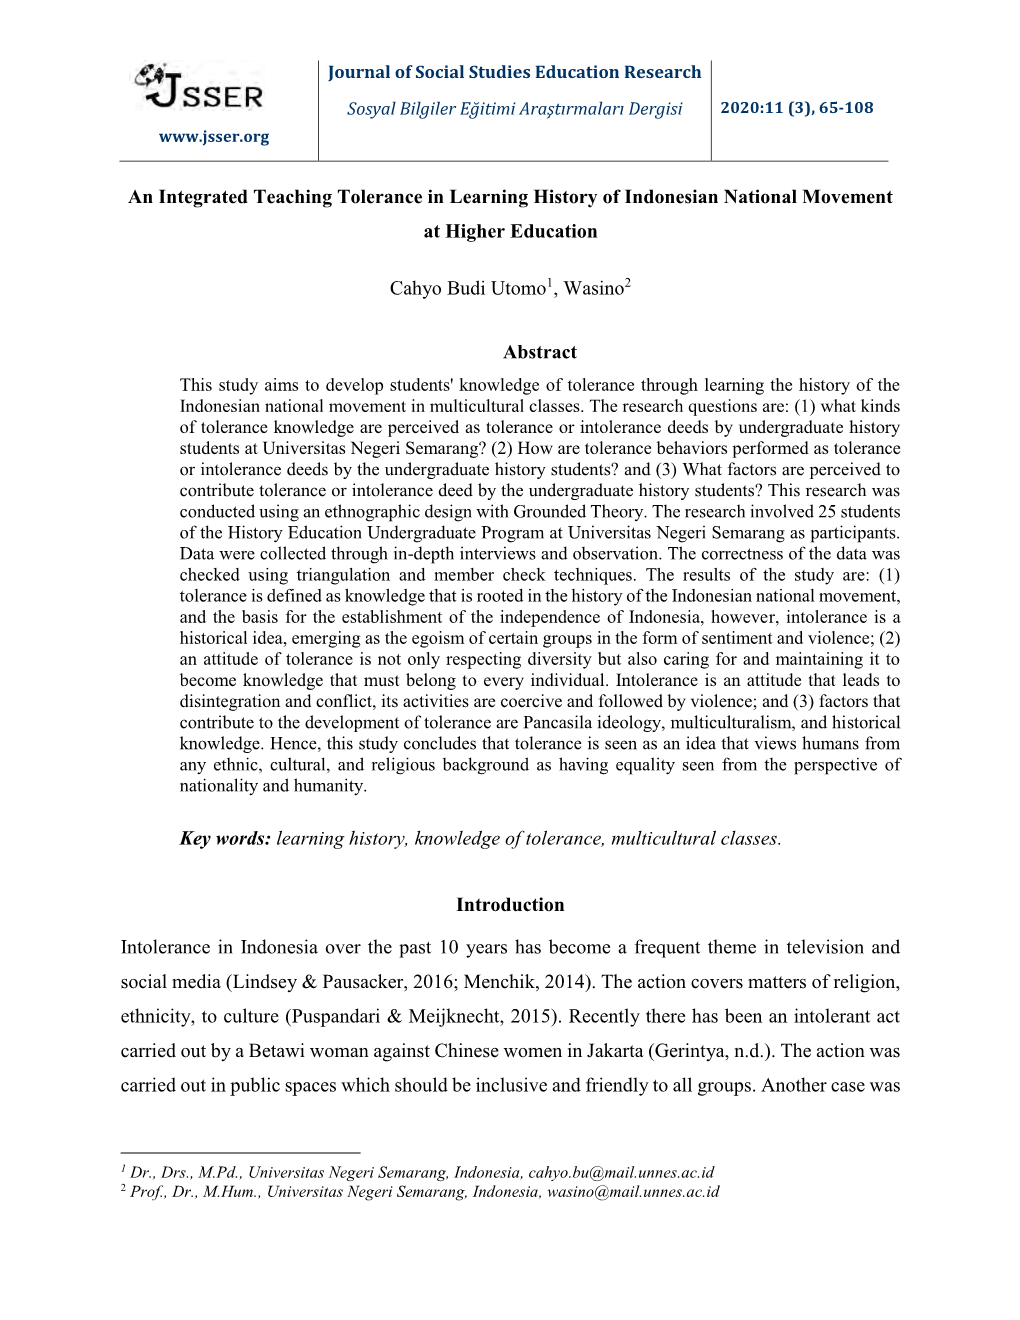 An Integrated Teaching Tolerance in Learning History of Indonesian National Movement at Higher Education